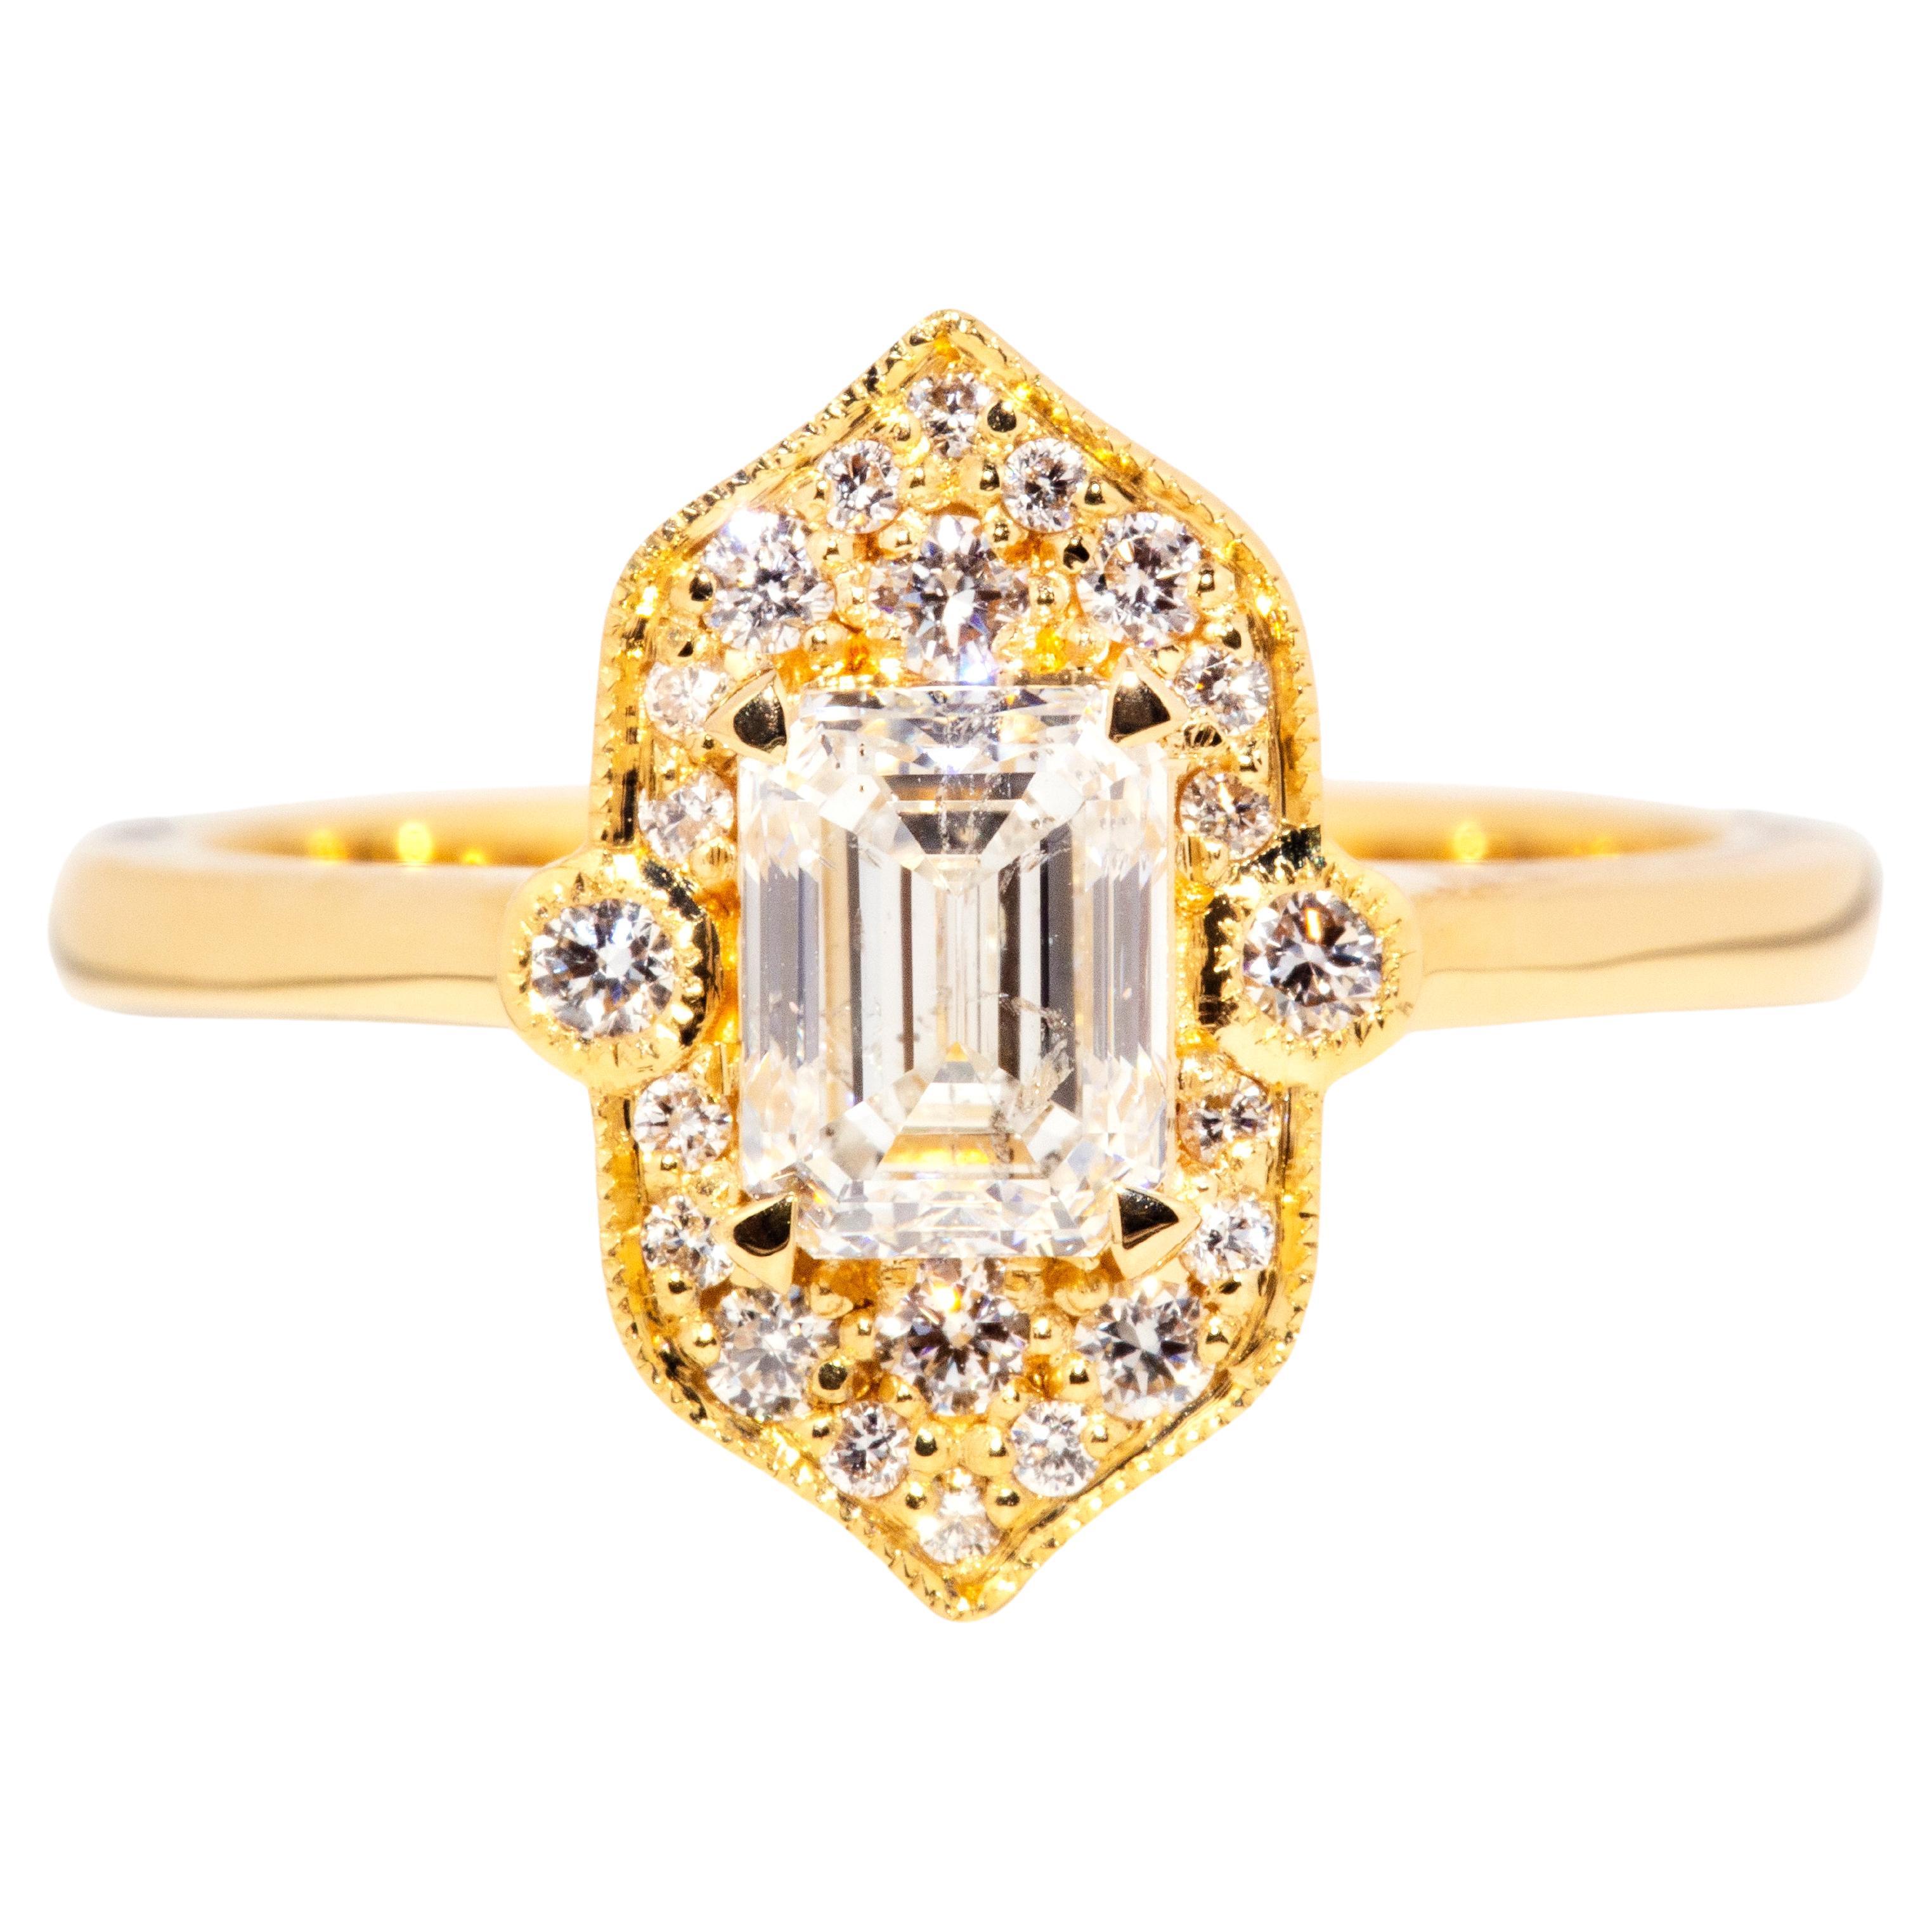 Contemporary HRD Certified 18 Carat Yellow Gold Emerald Cut Diamond Cluster Ring